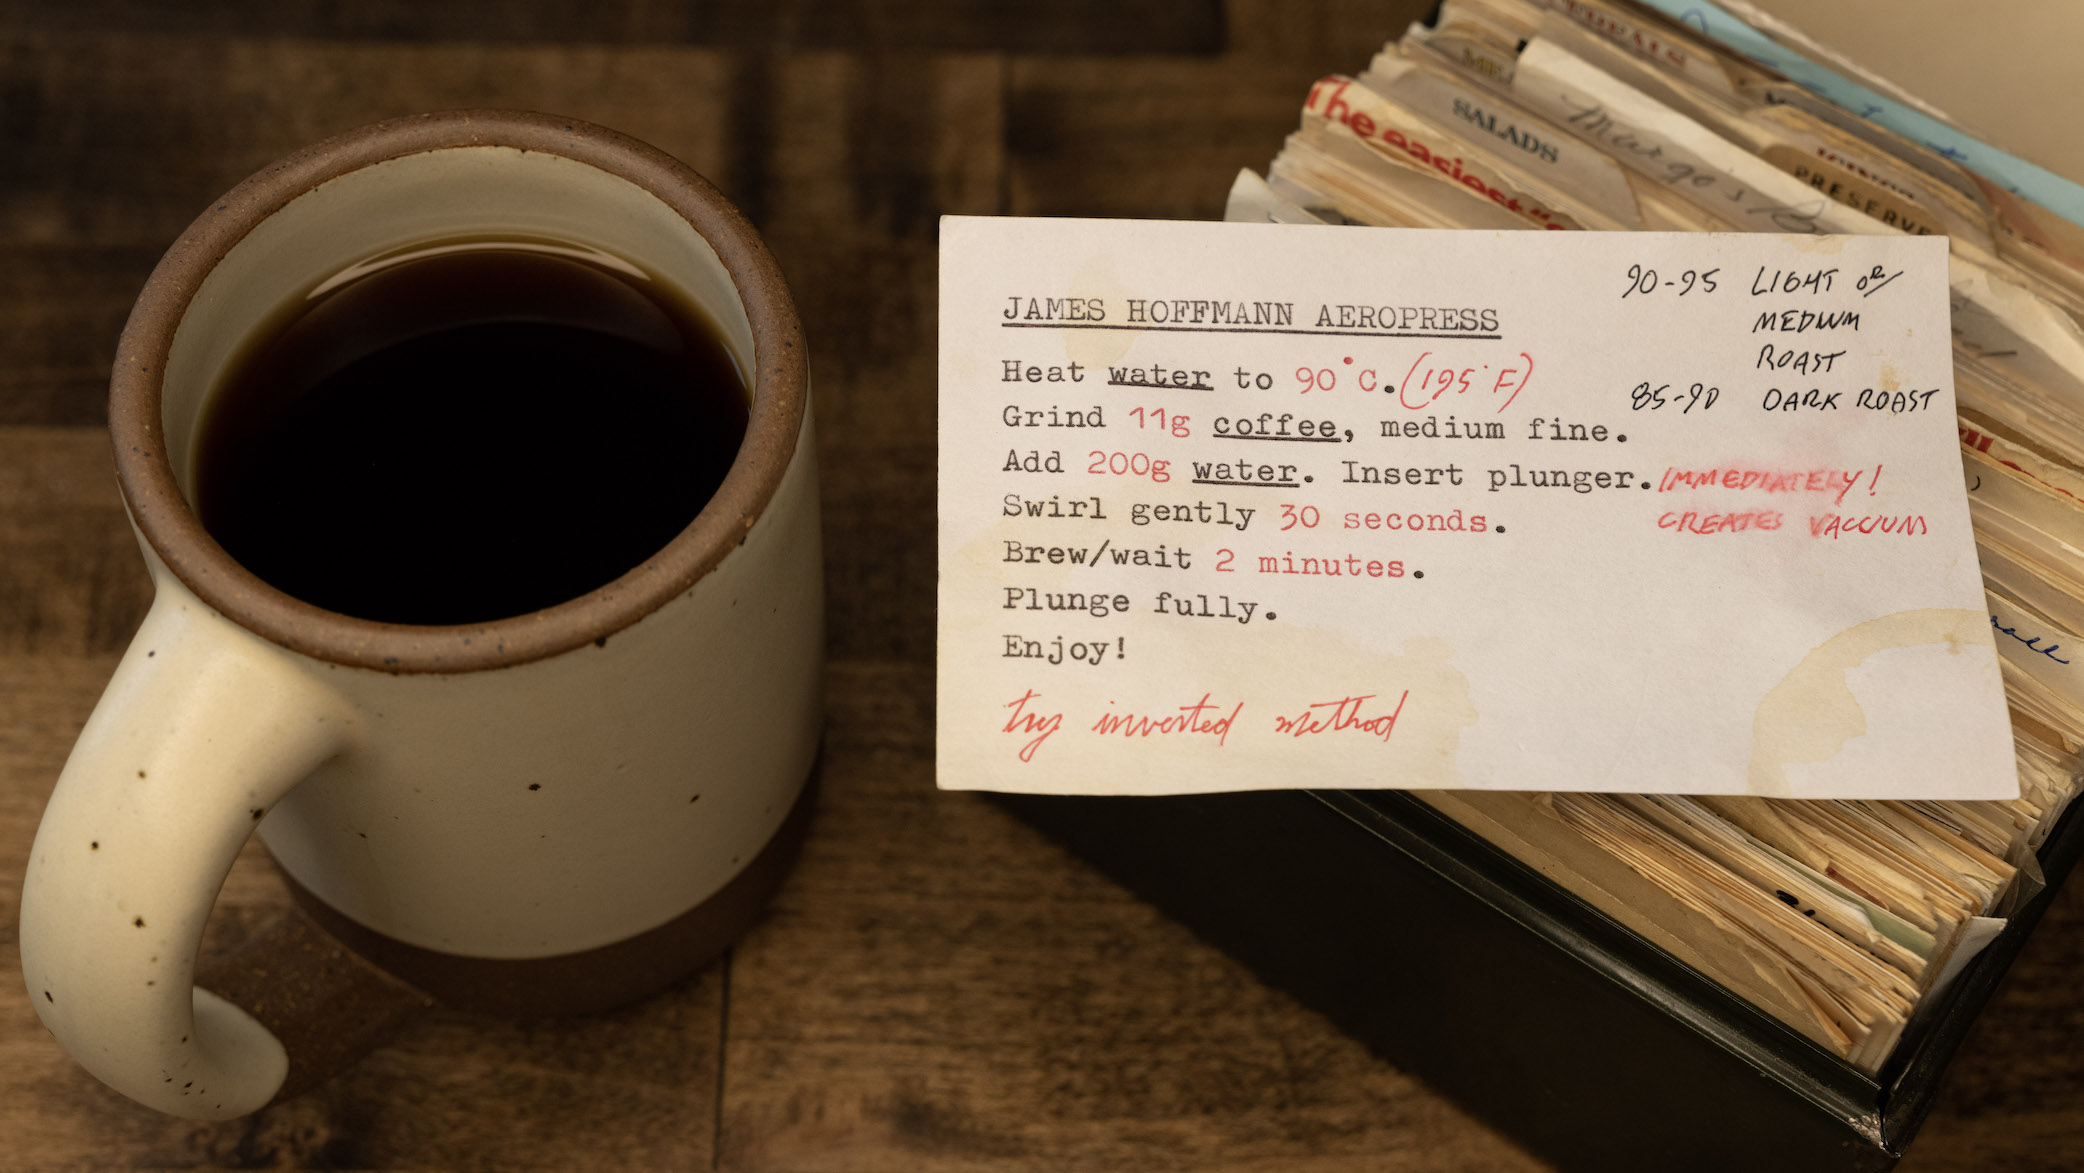 A coffee recipe with handwritten annotations